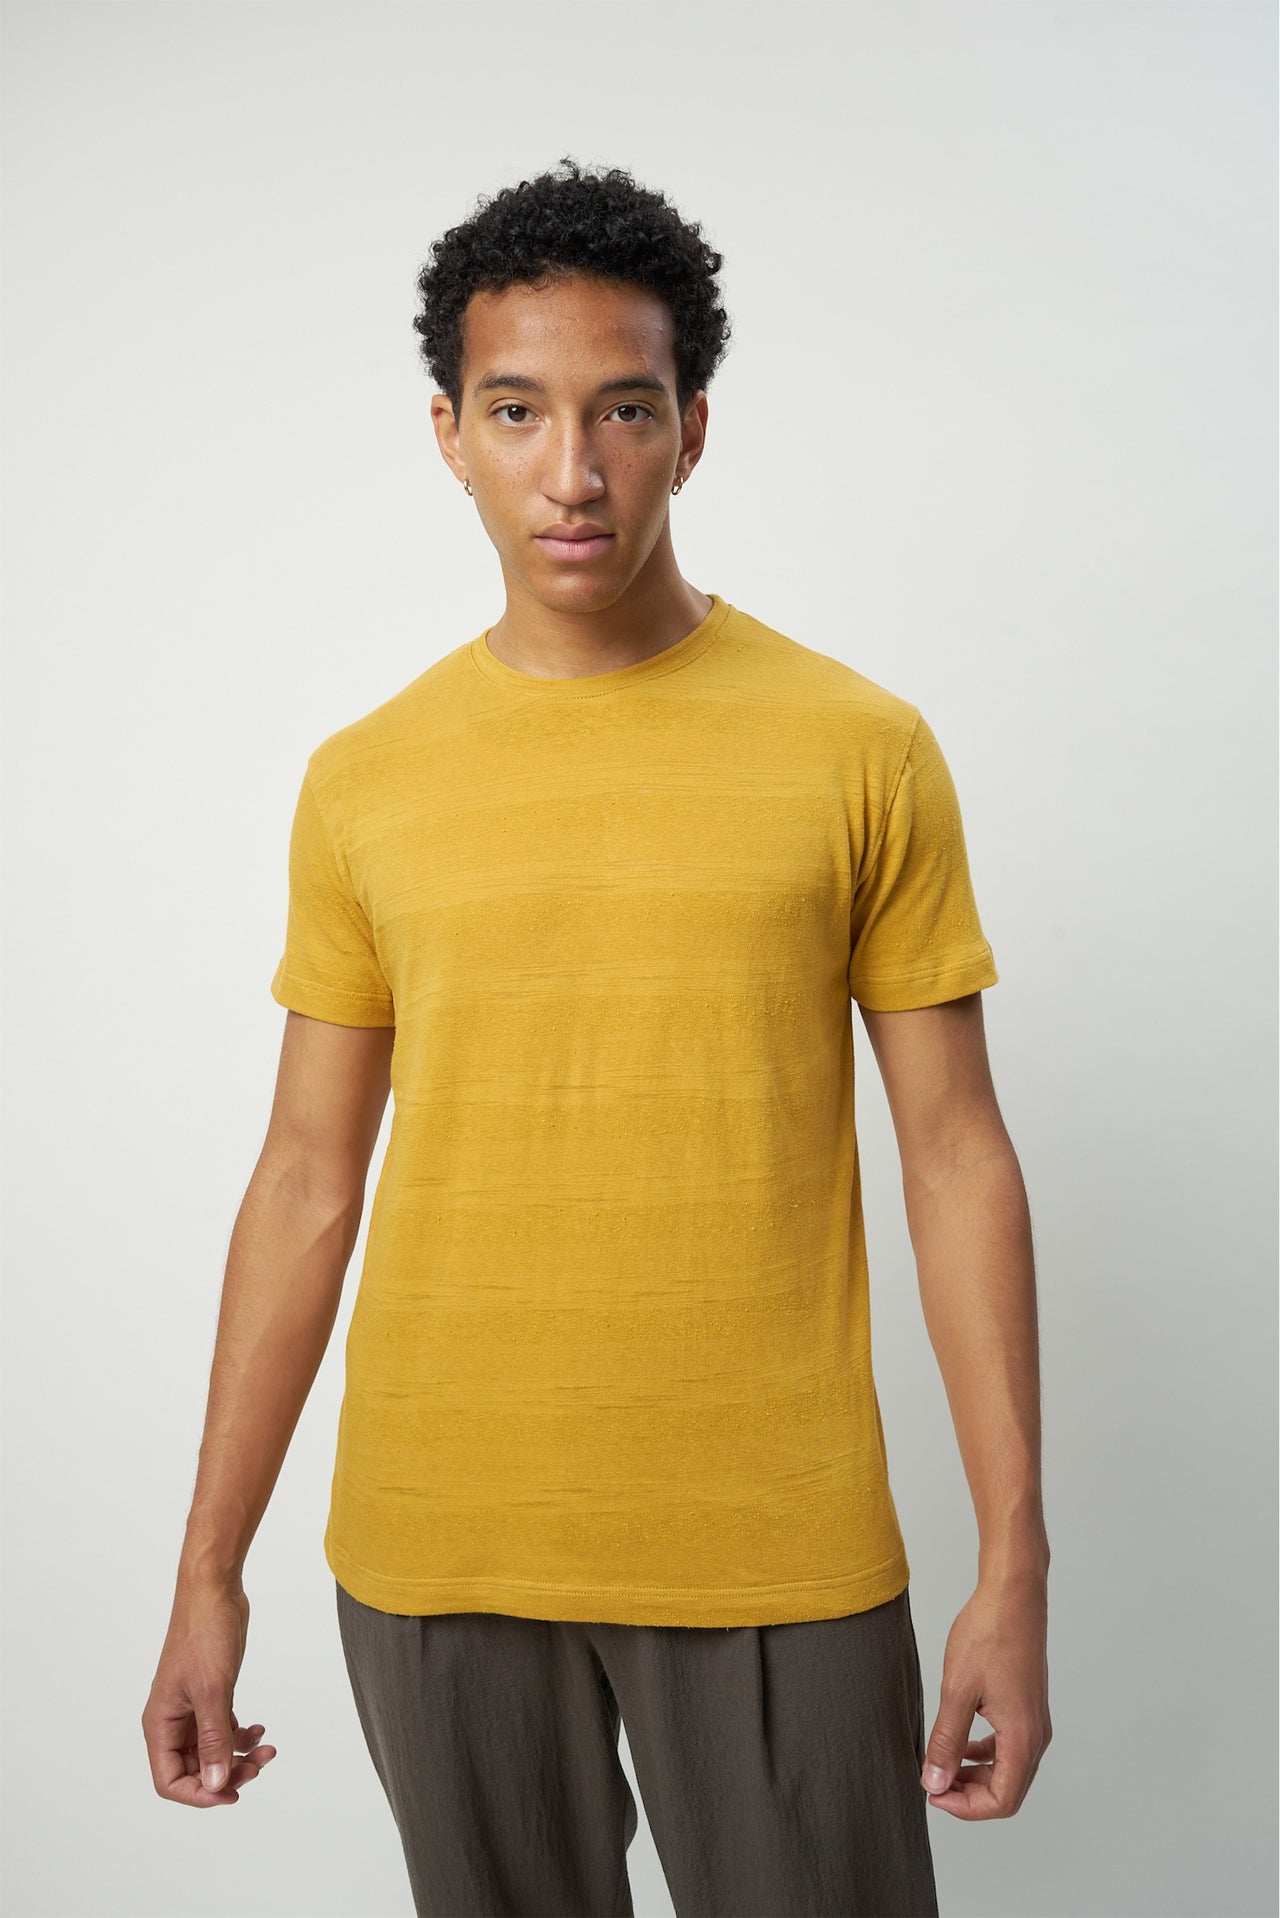 T-Shirt in a Yellow Japanese Slow-Knit Cotton Jersey